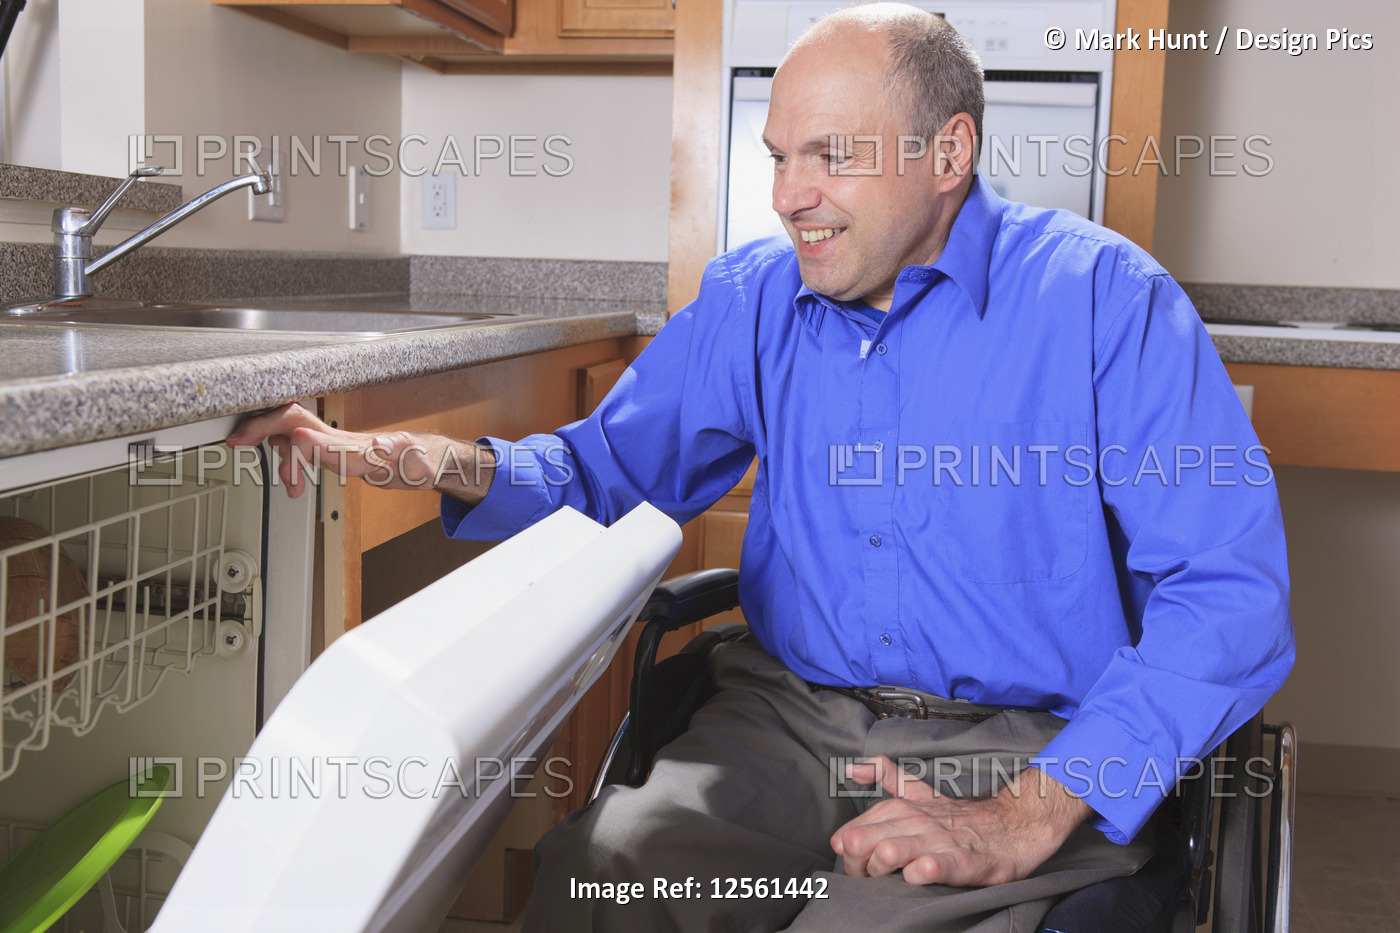 Man with Friedreich's Ataxia and deformed hands using his dishwasher